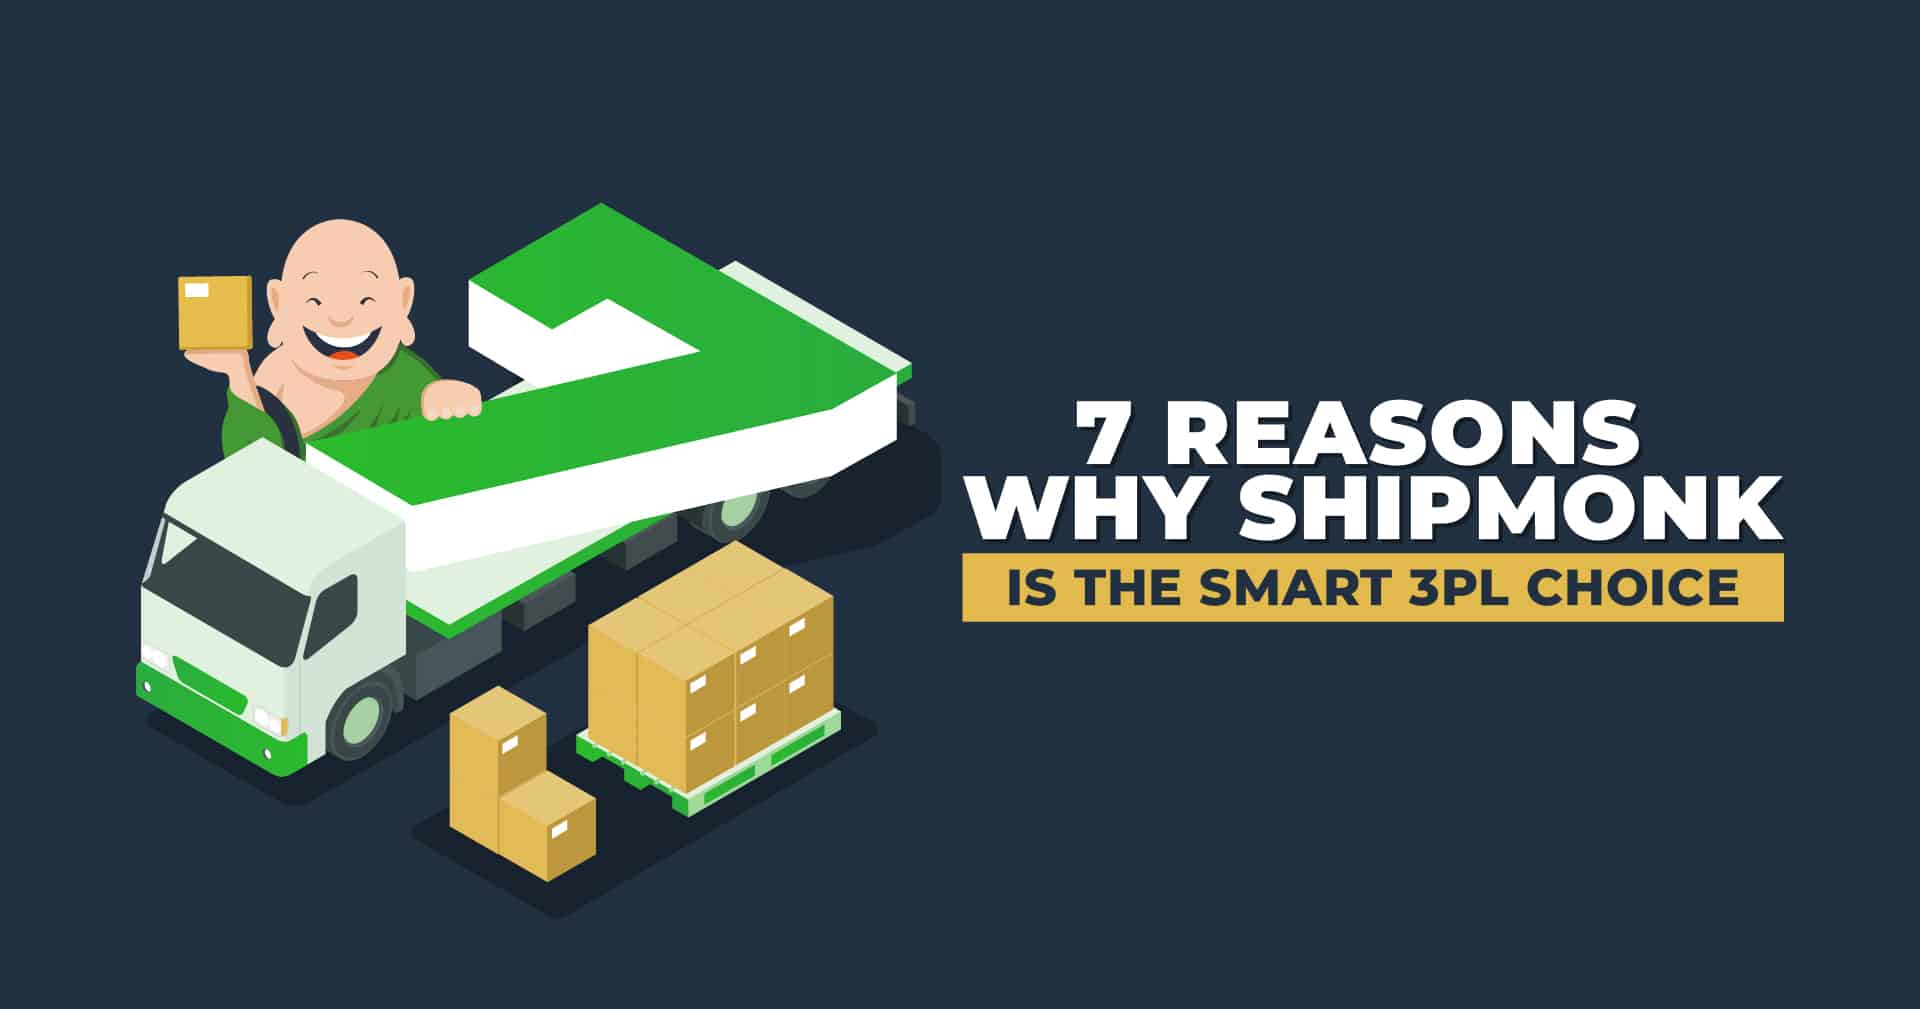 7 Reasons Why ShipMonk is the Smart 3PL Choice